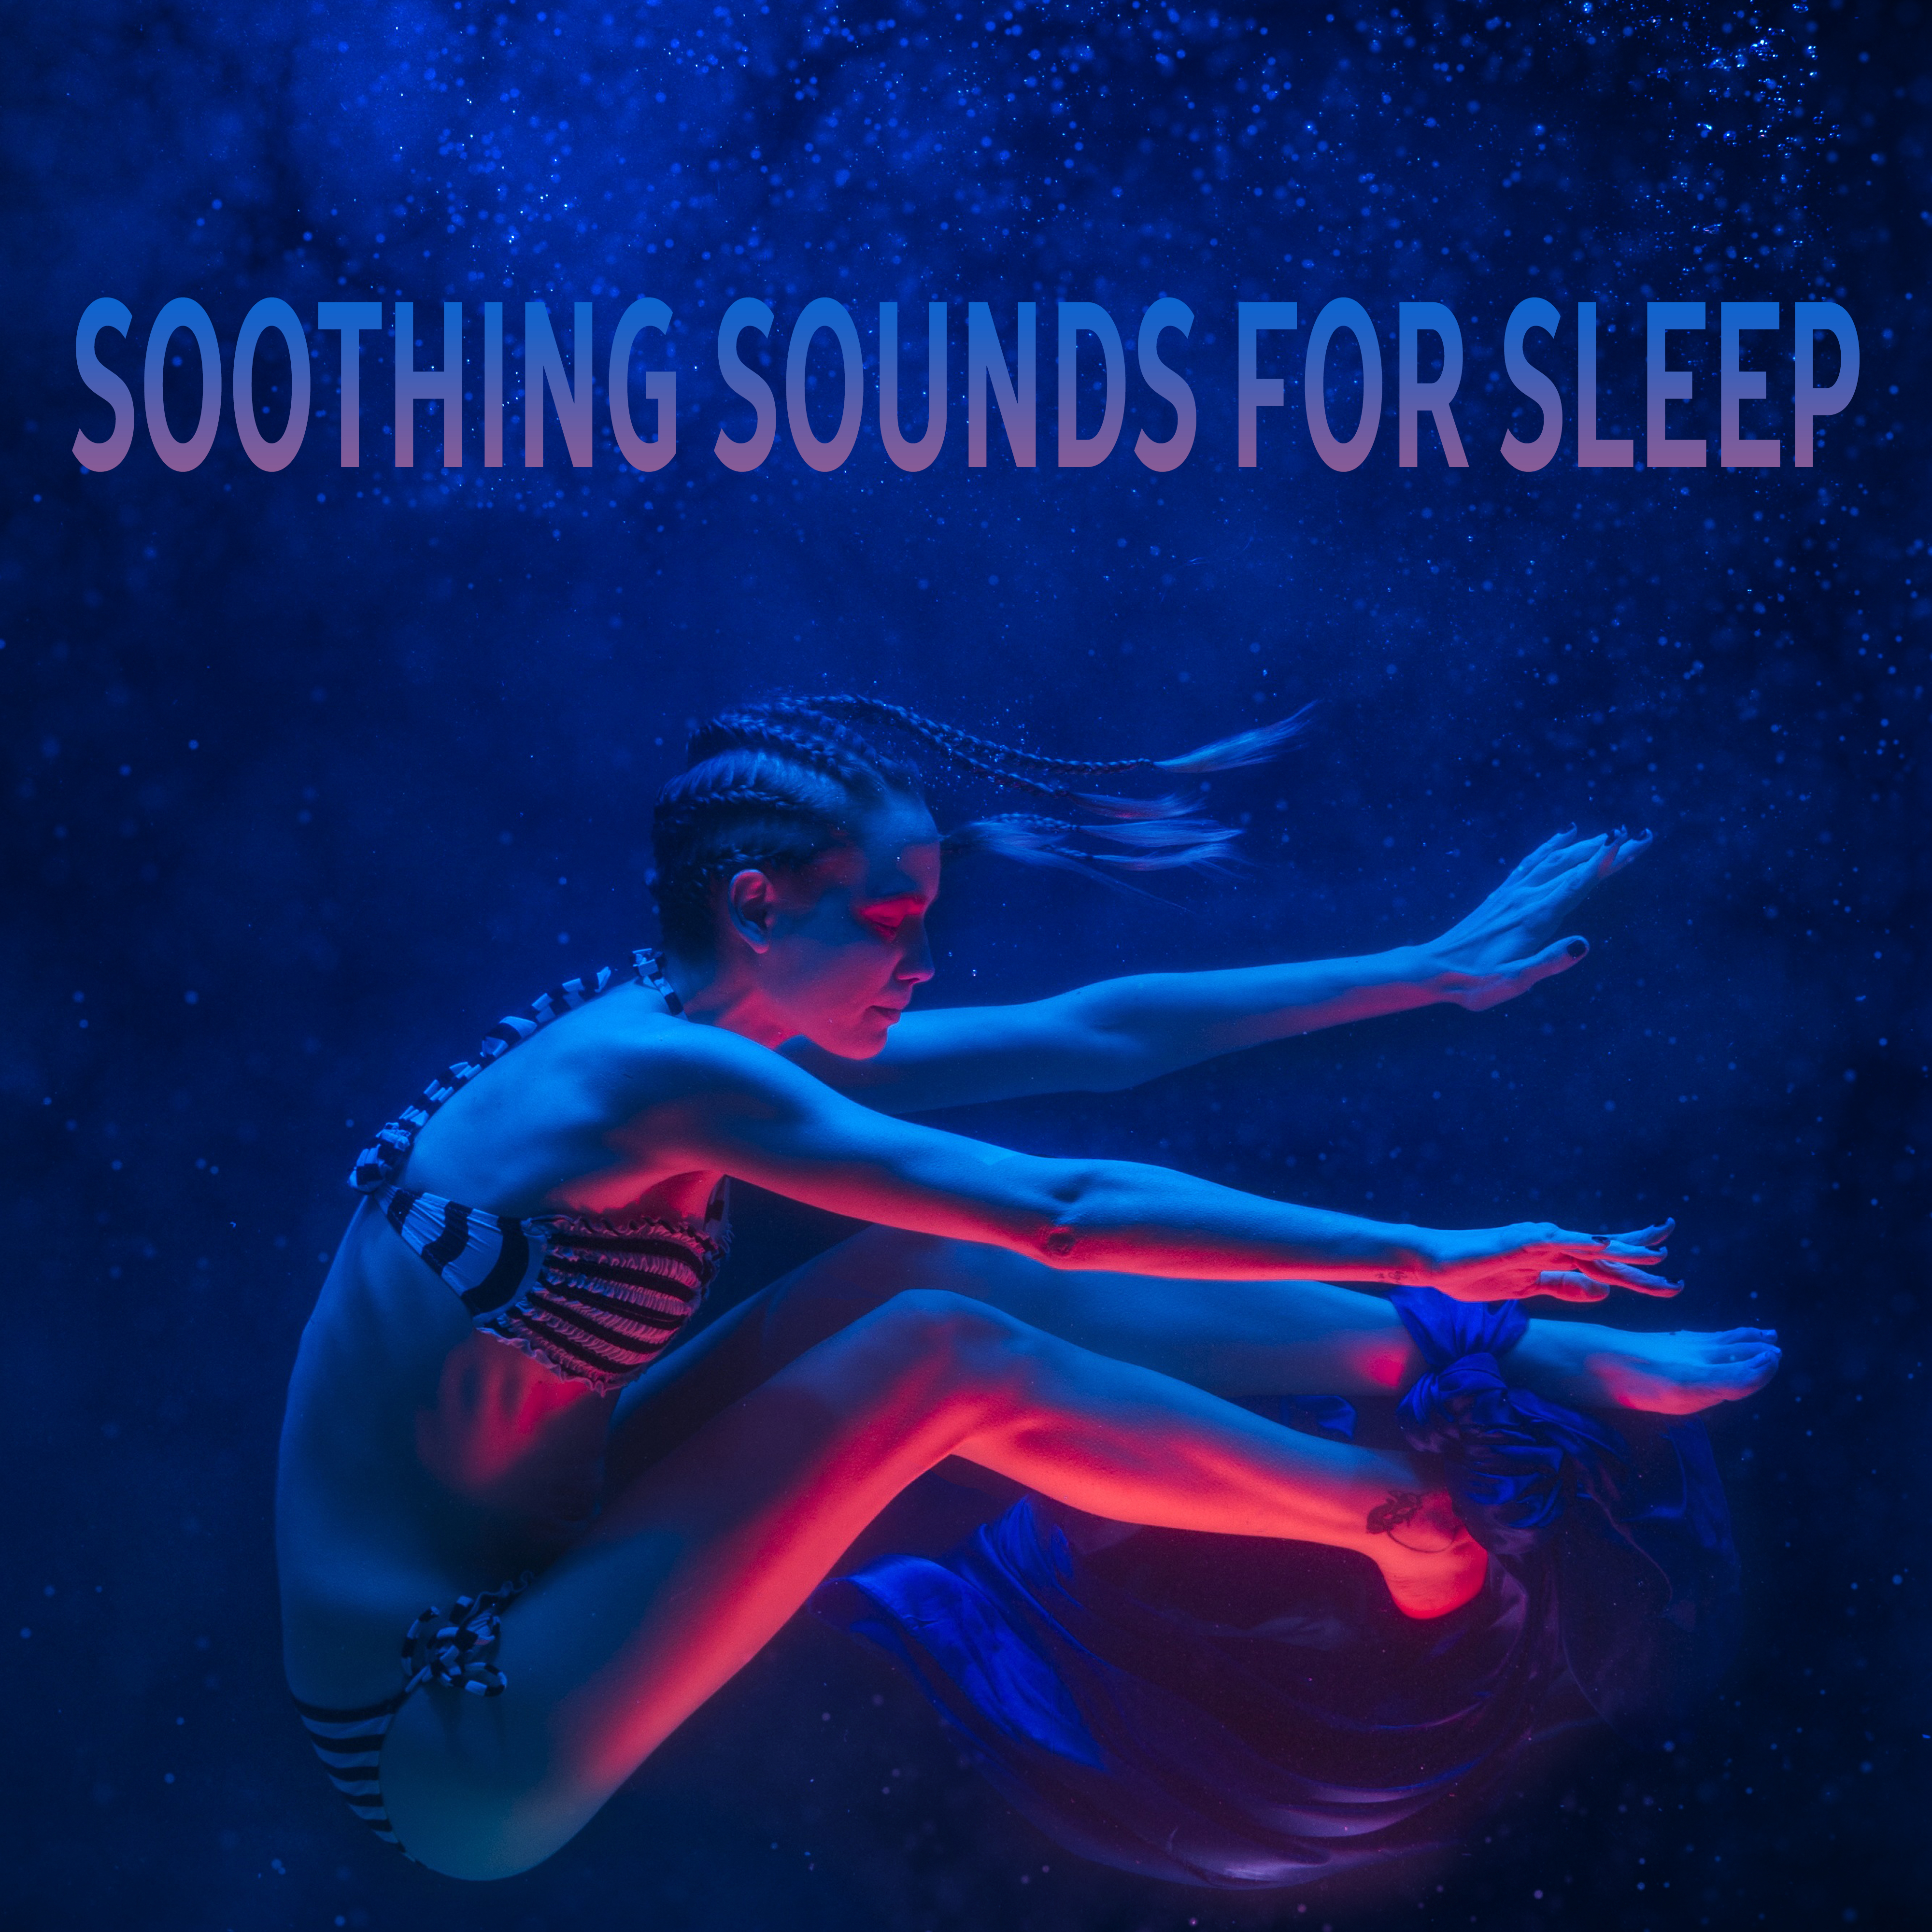 Soothing Sounds for Sleep – Sweet Dreams, Healing Lullaby, Relaxation Bedtime, Nature Sounds, Relaxing Waves, Water, Restful Sleep